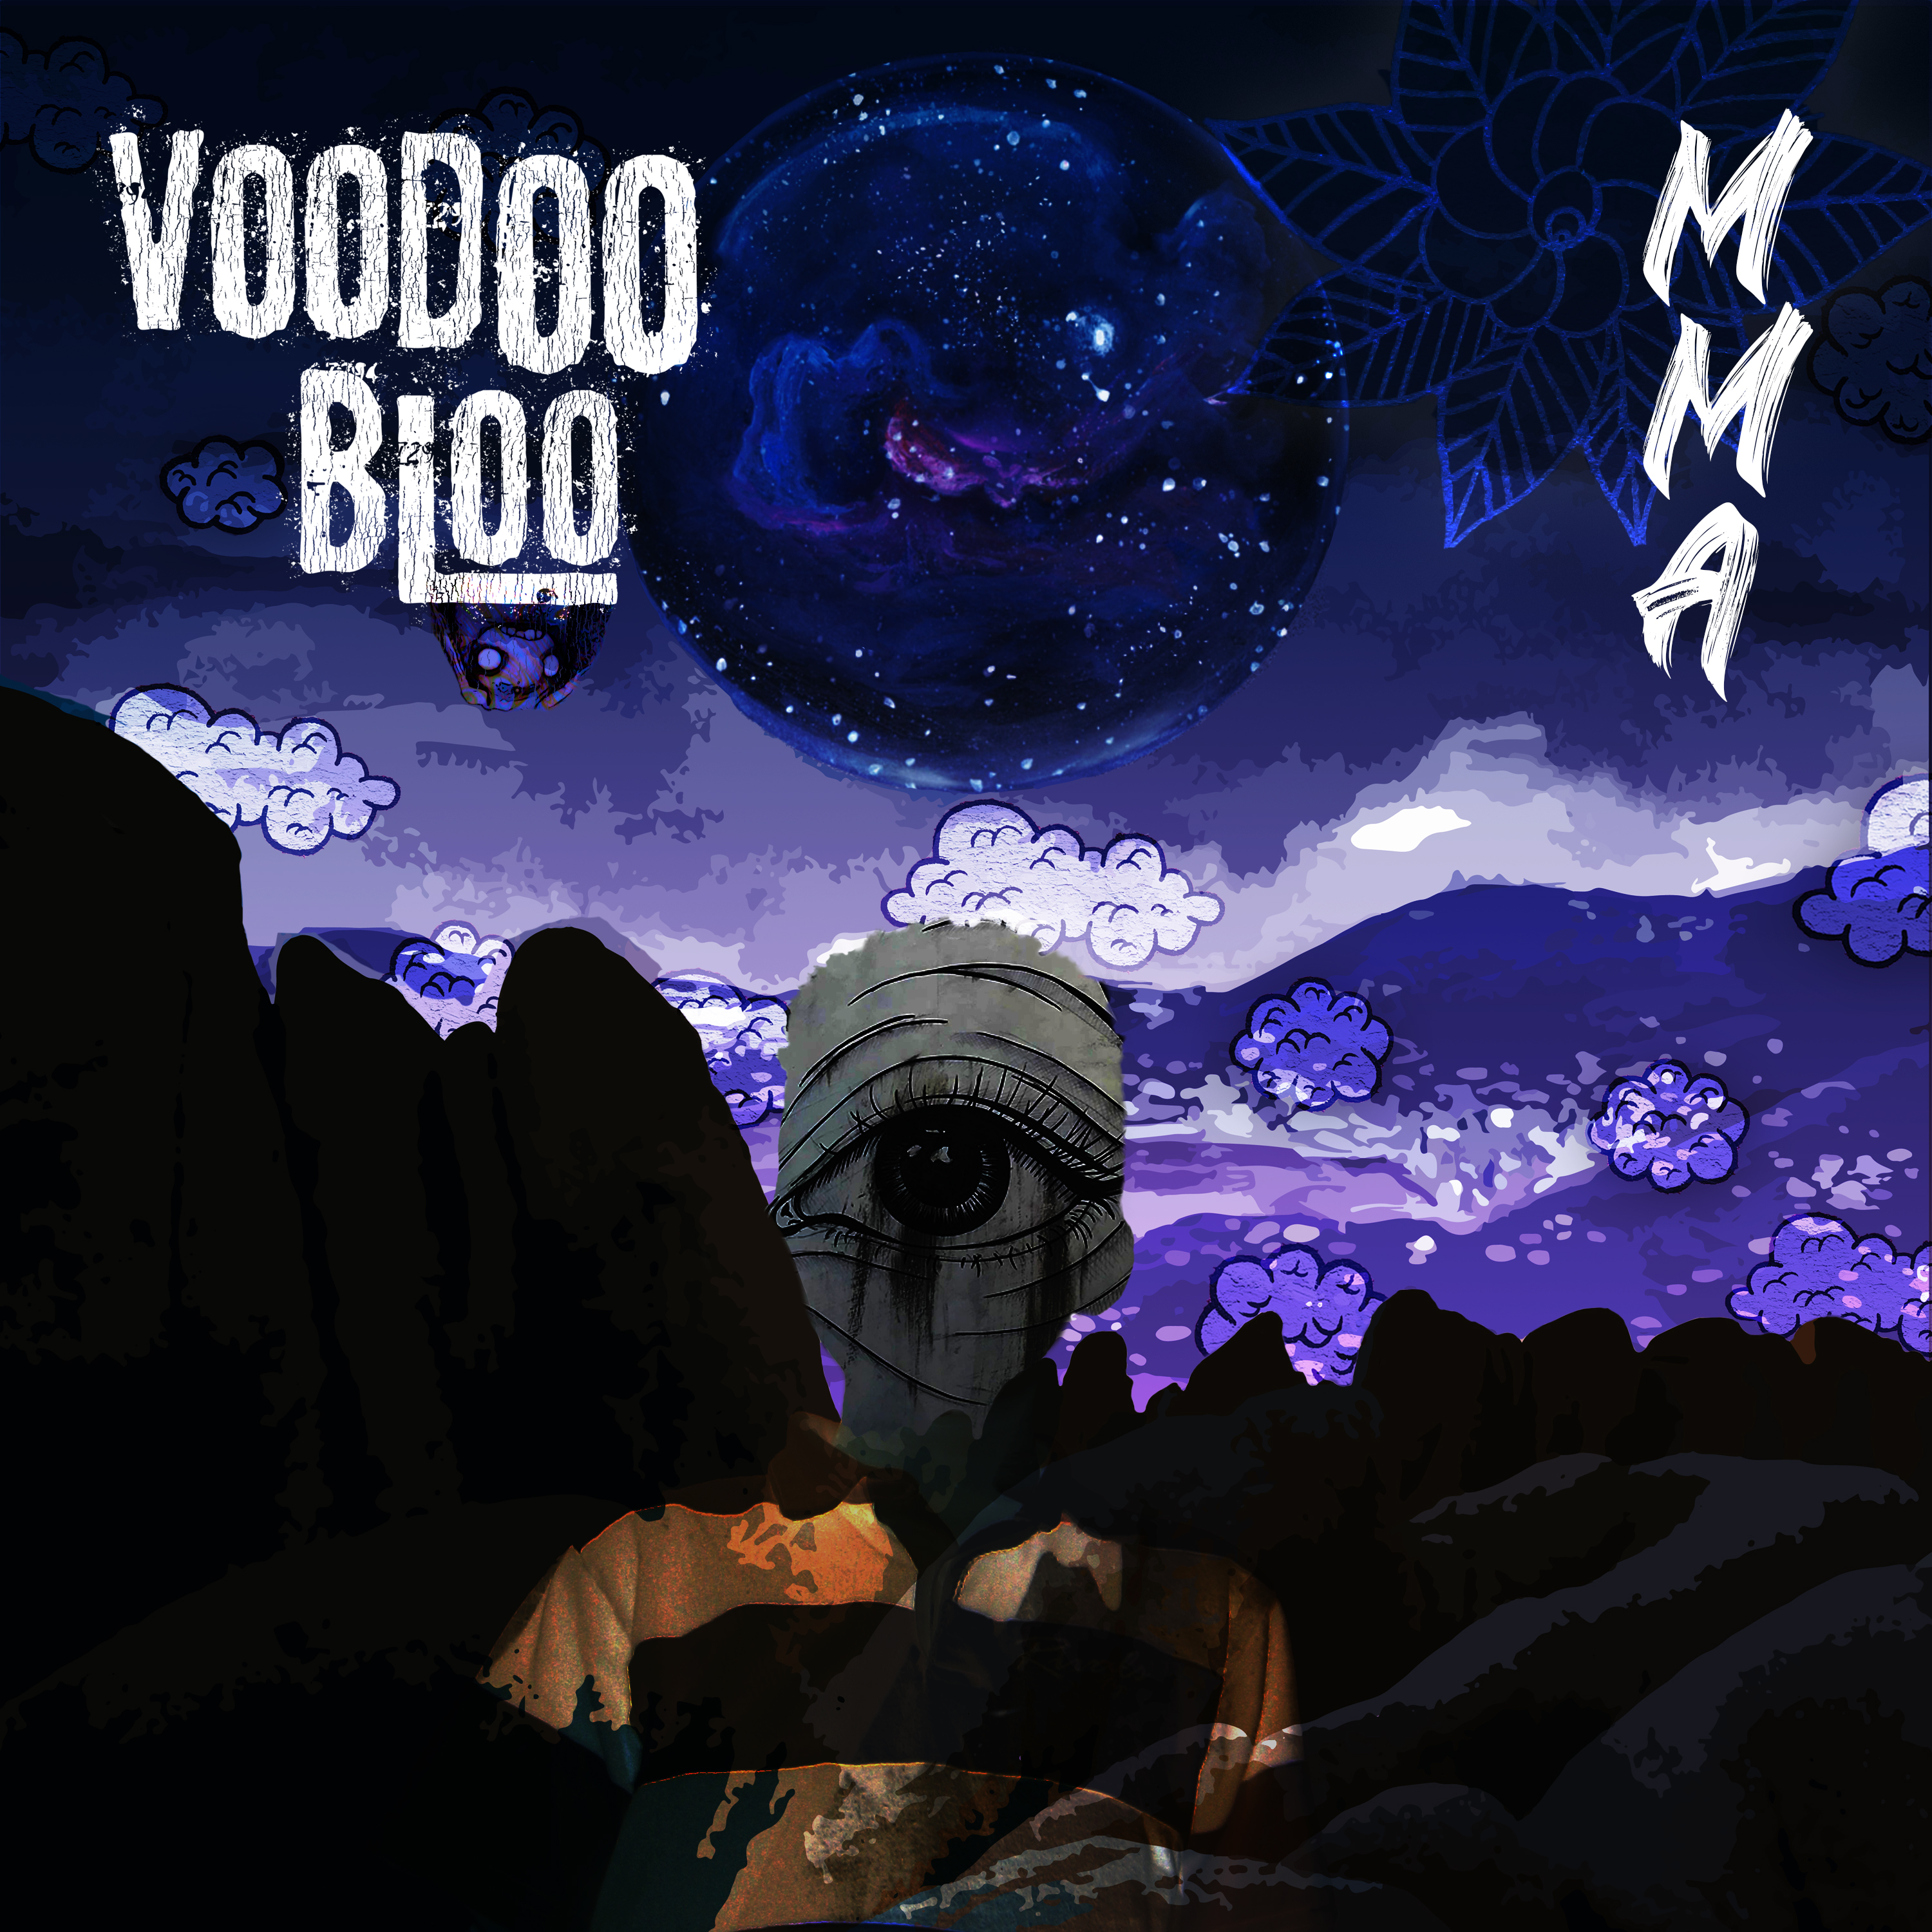 Voodoo Bloo Packs Quite A Punch On “MMA”